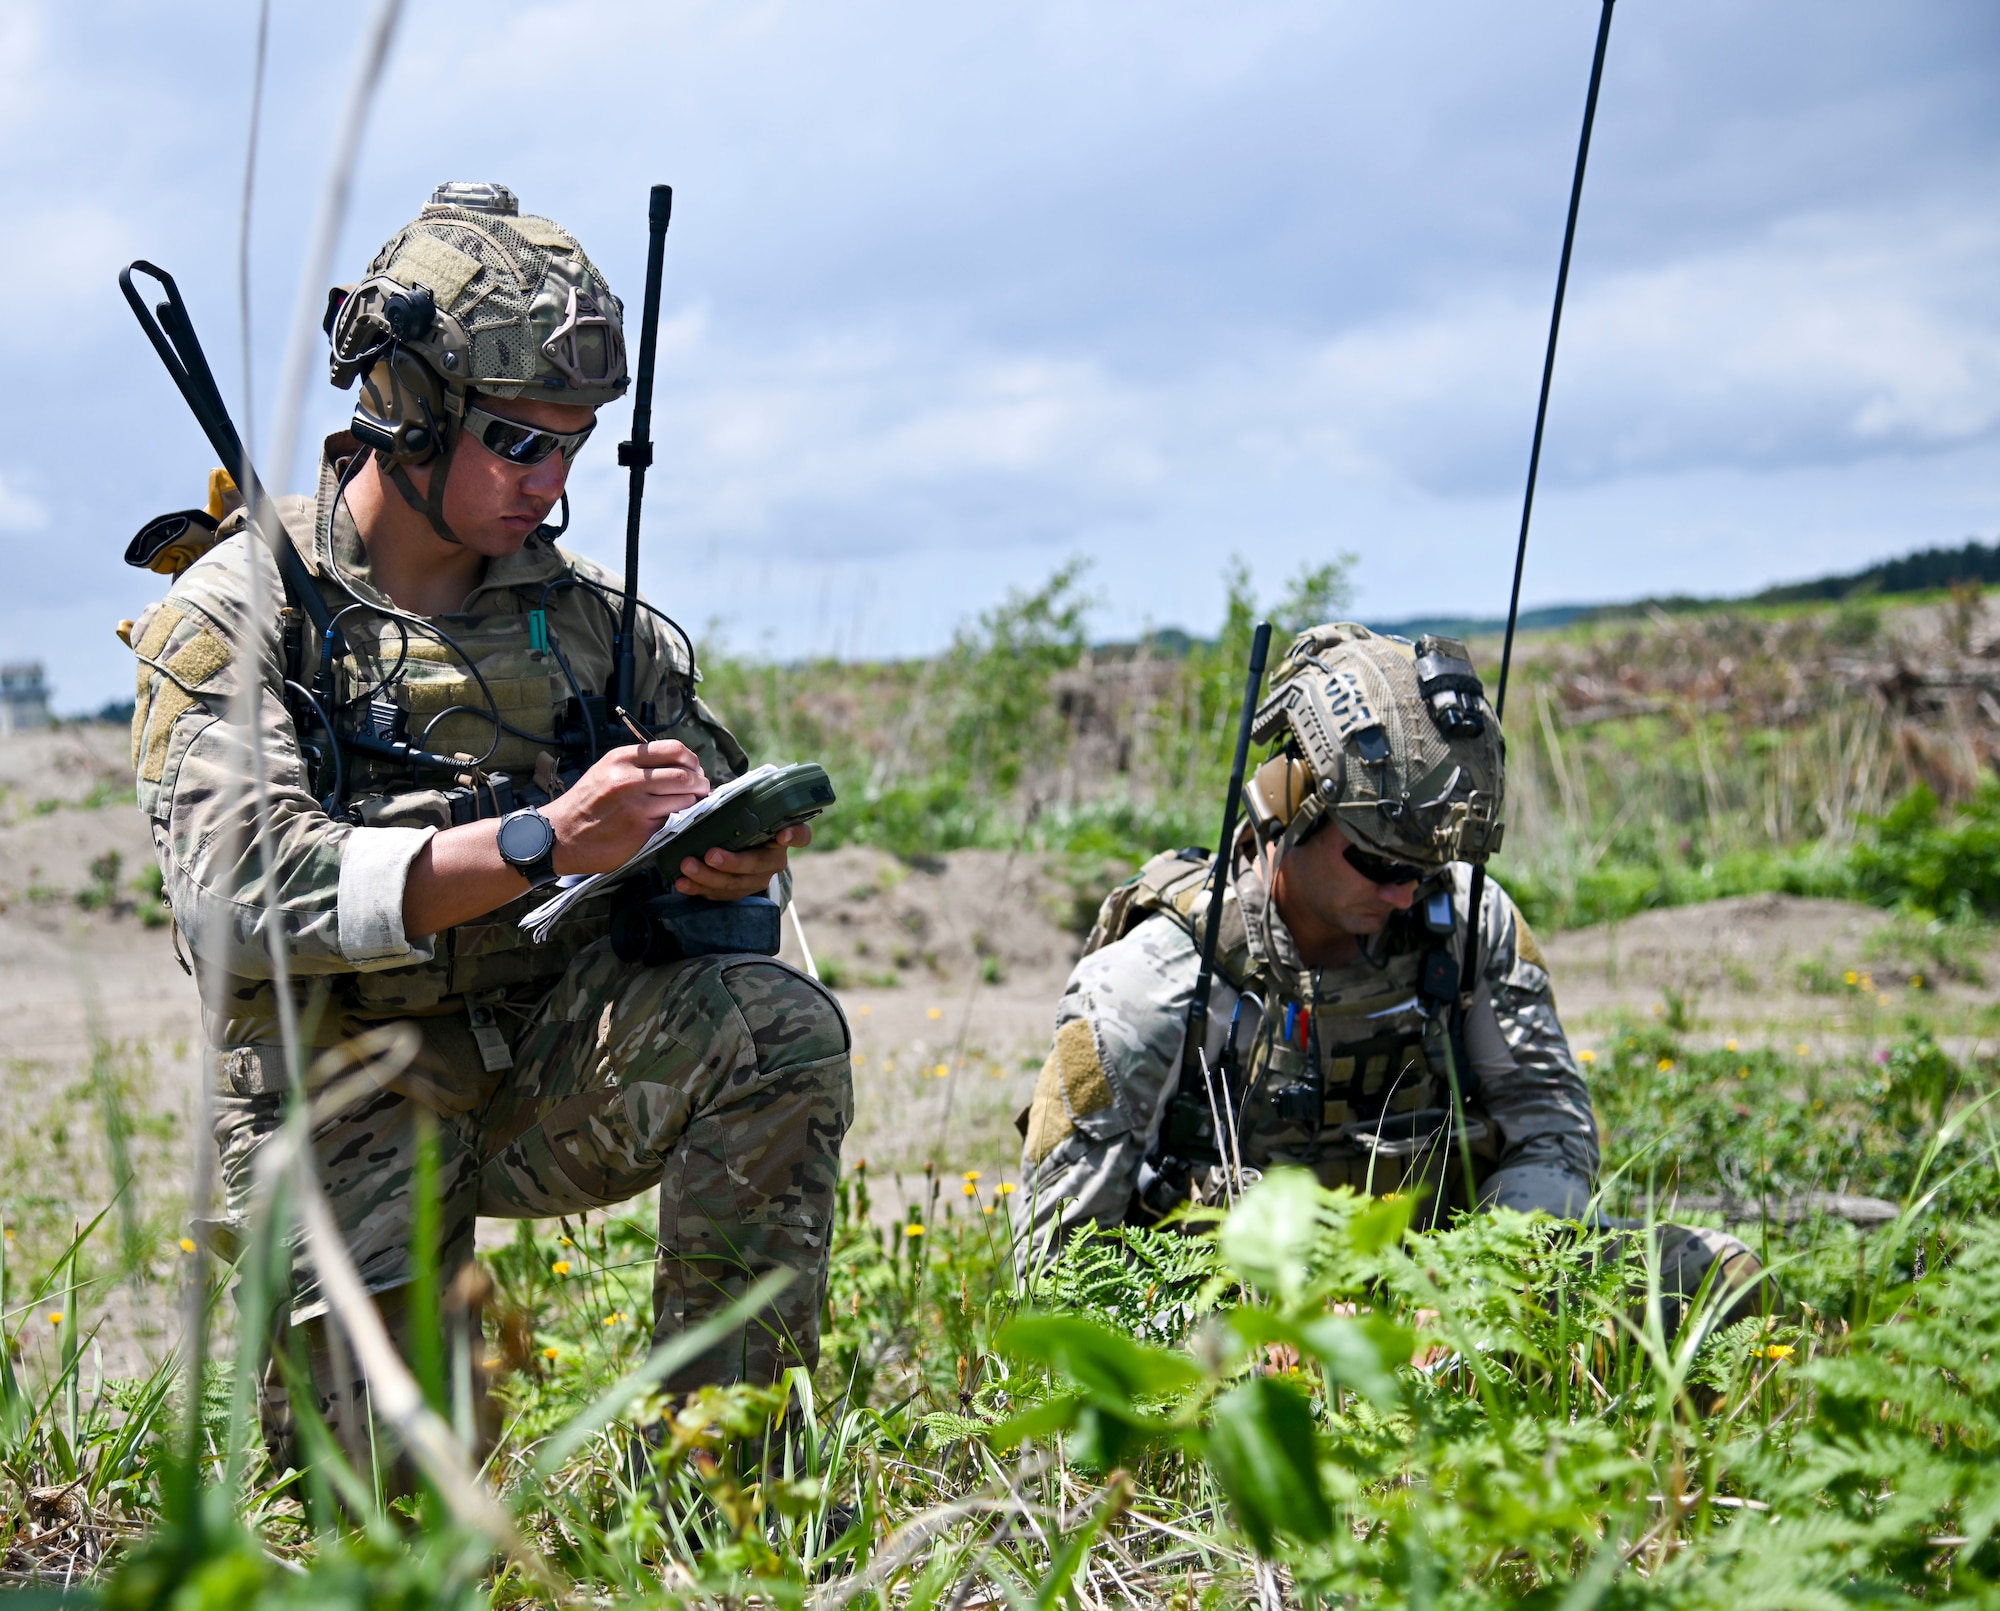 A U.S. Air Force joint terminal attack controller, left, fills in information for a 9-line while another JTAC, both assigned to the 320th Special Tactics Squadron, evaluates him at Draughon Range, near Misawa Air Base, Japan, June 15, 2020. A 9-line is a standardized format in which a JTAC gives targeting information to aircraft pilots. Brandt and other JTACS from the 320th STS came to Draughon Range to maintain their currency as combat controllers. (U.S. Air Force photo by Tech. Sgt. Timothy Moore)